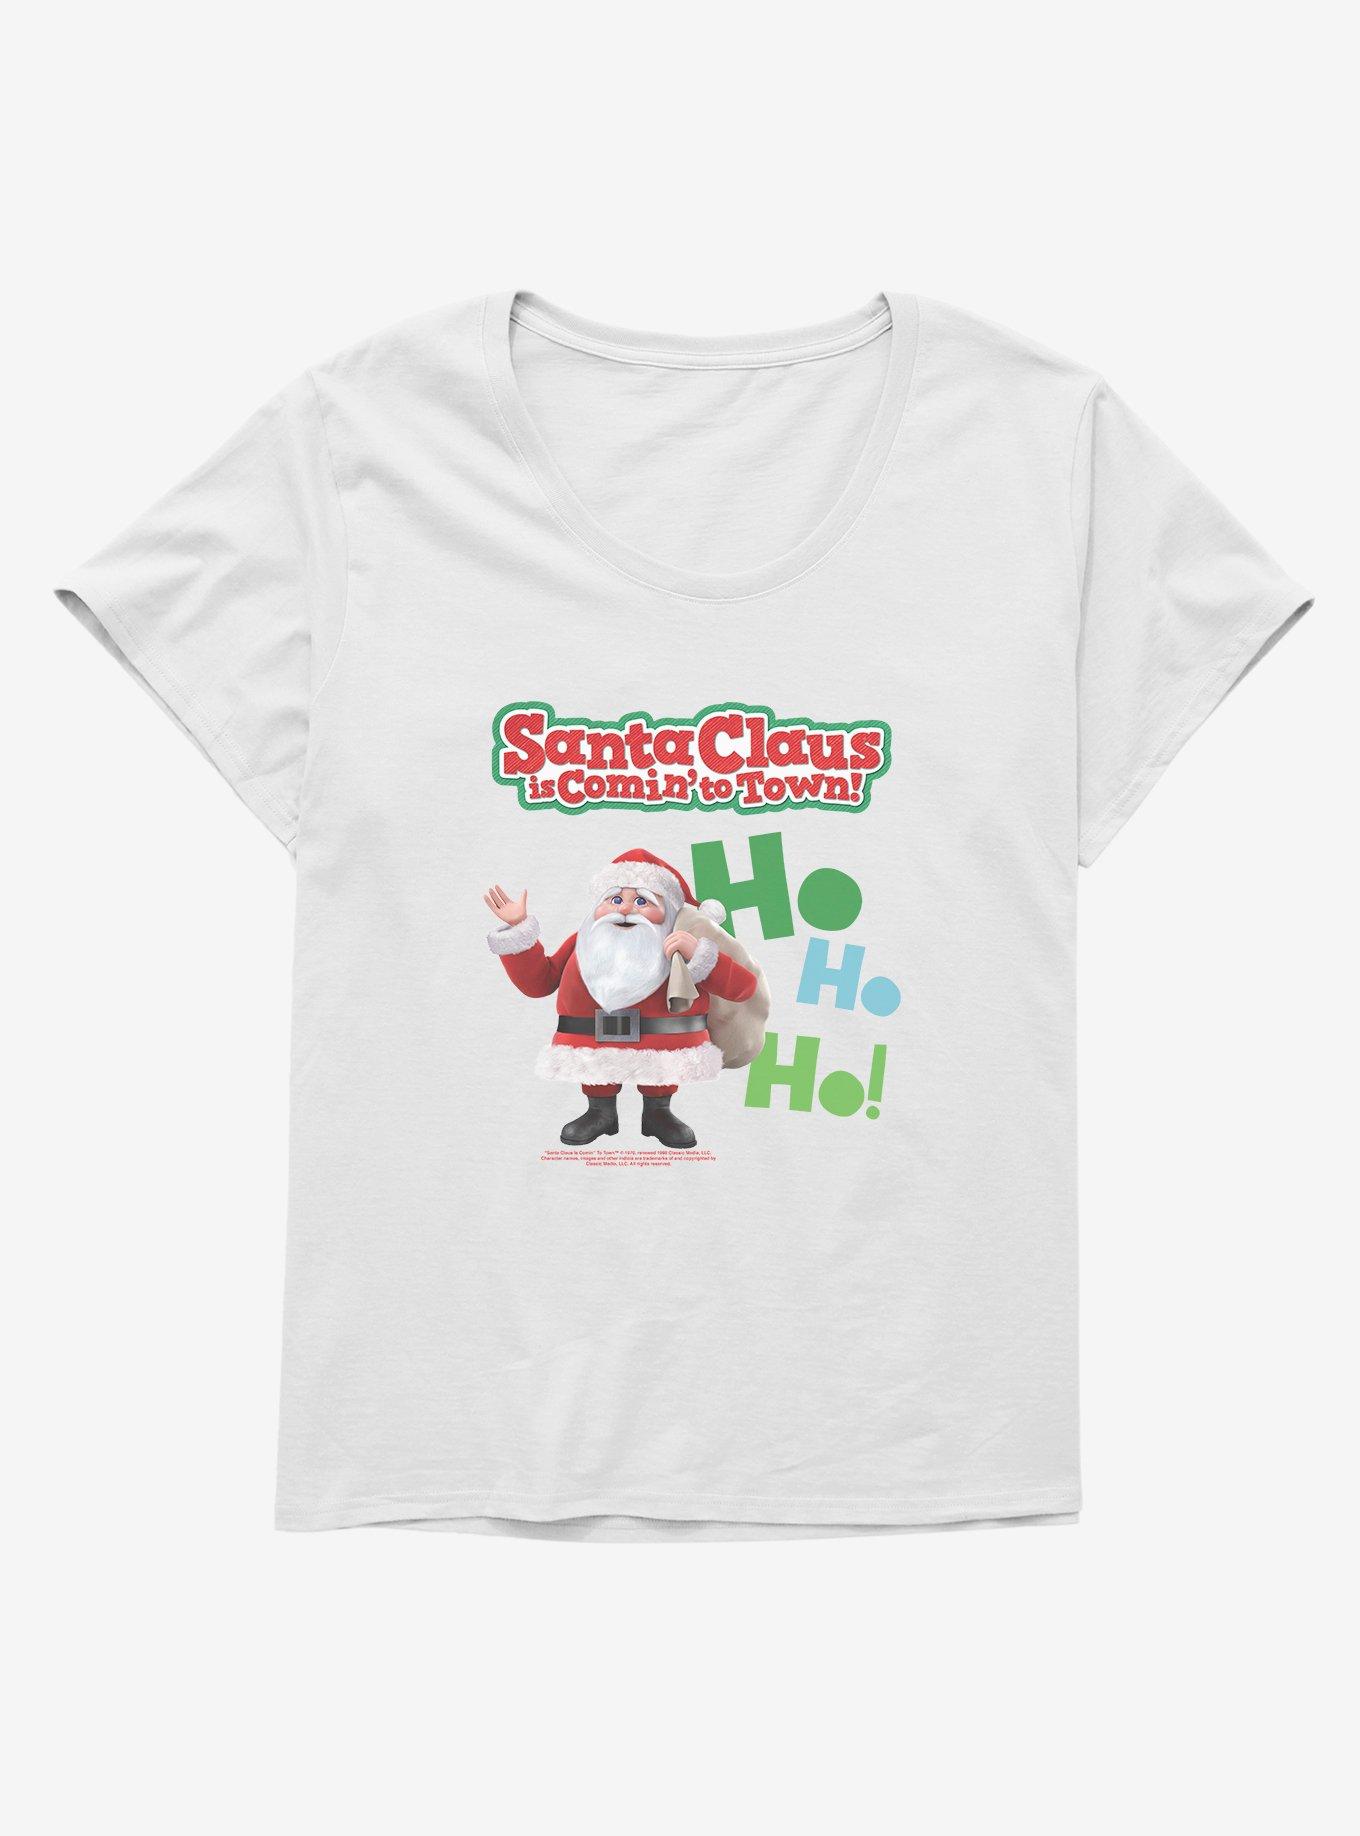 Santa Claus Is Comin' To Town! Ho Ho! Girls T-Shirt Plus